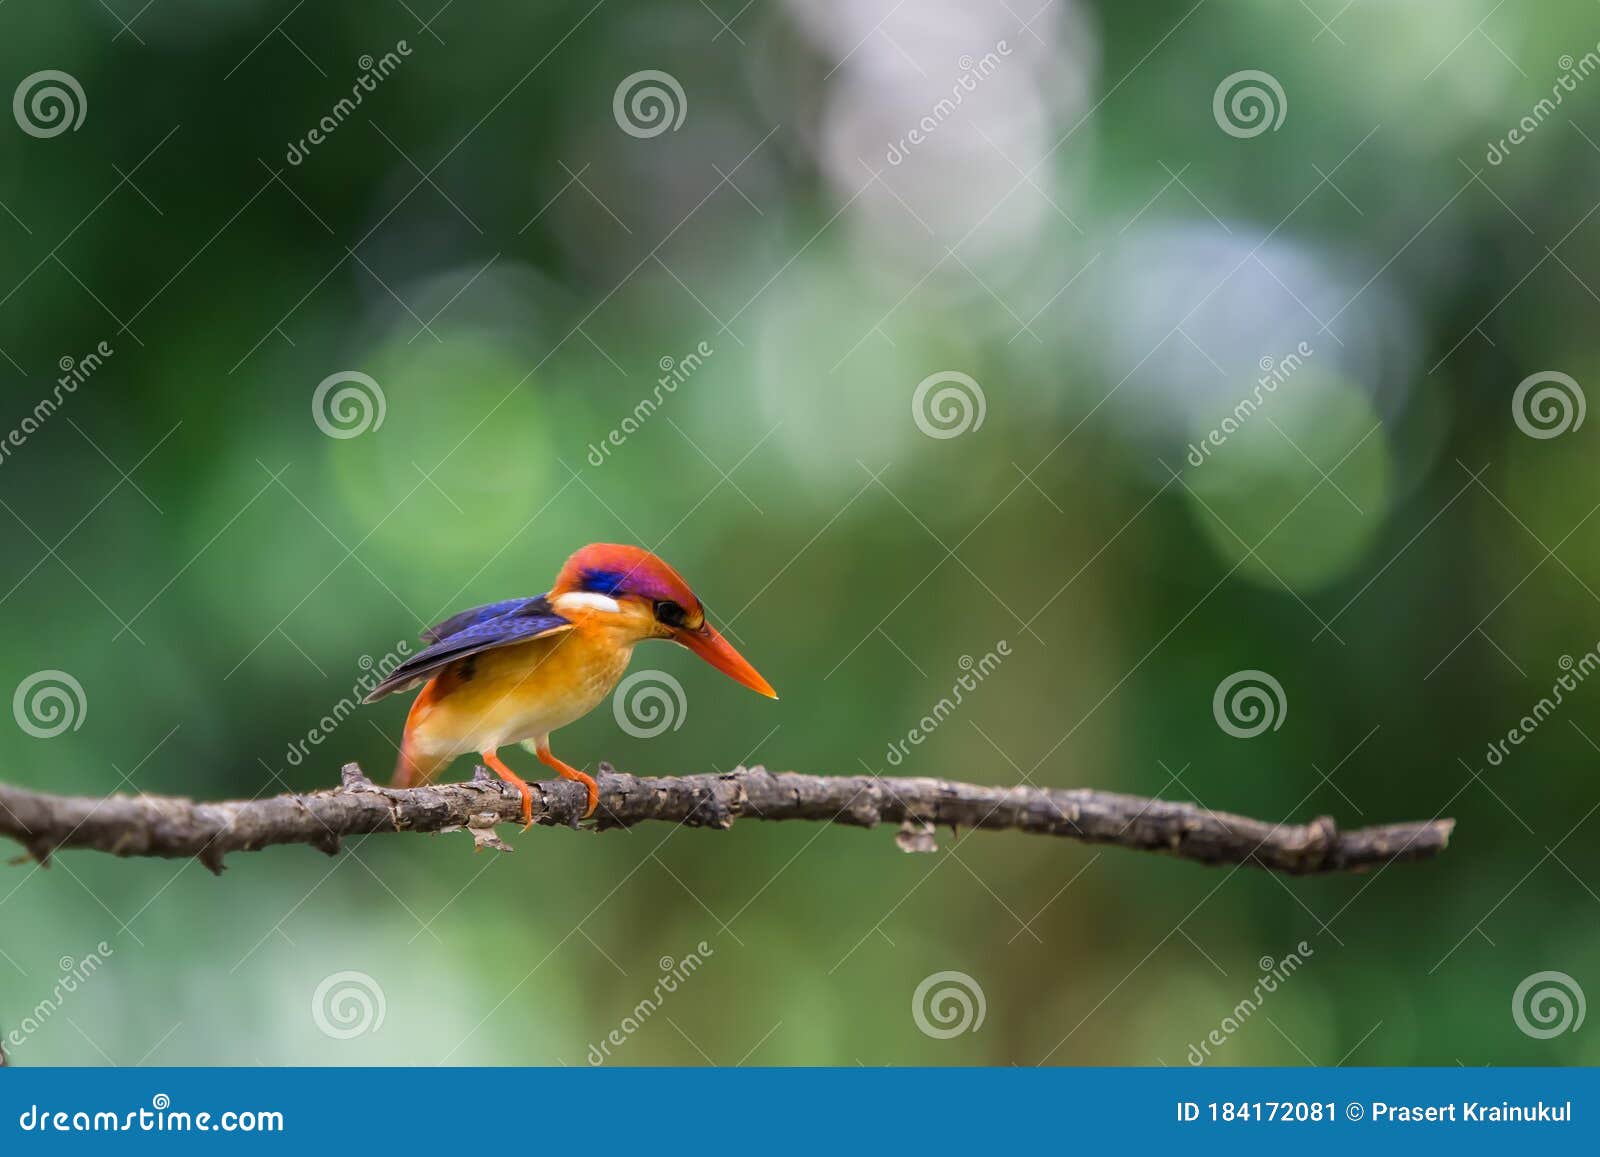 the oriental dwarf kingfisher also known as the black-backed kingfisher or three-toed kingfisher ceyx erithaca is a species of